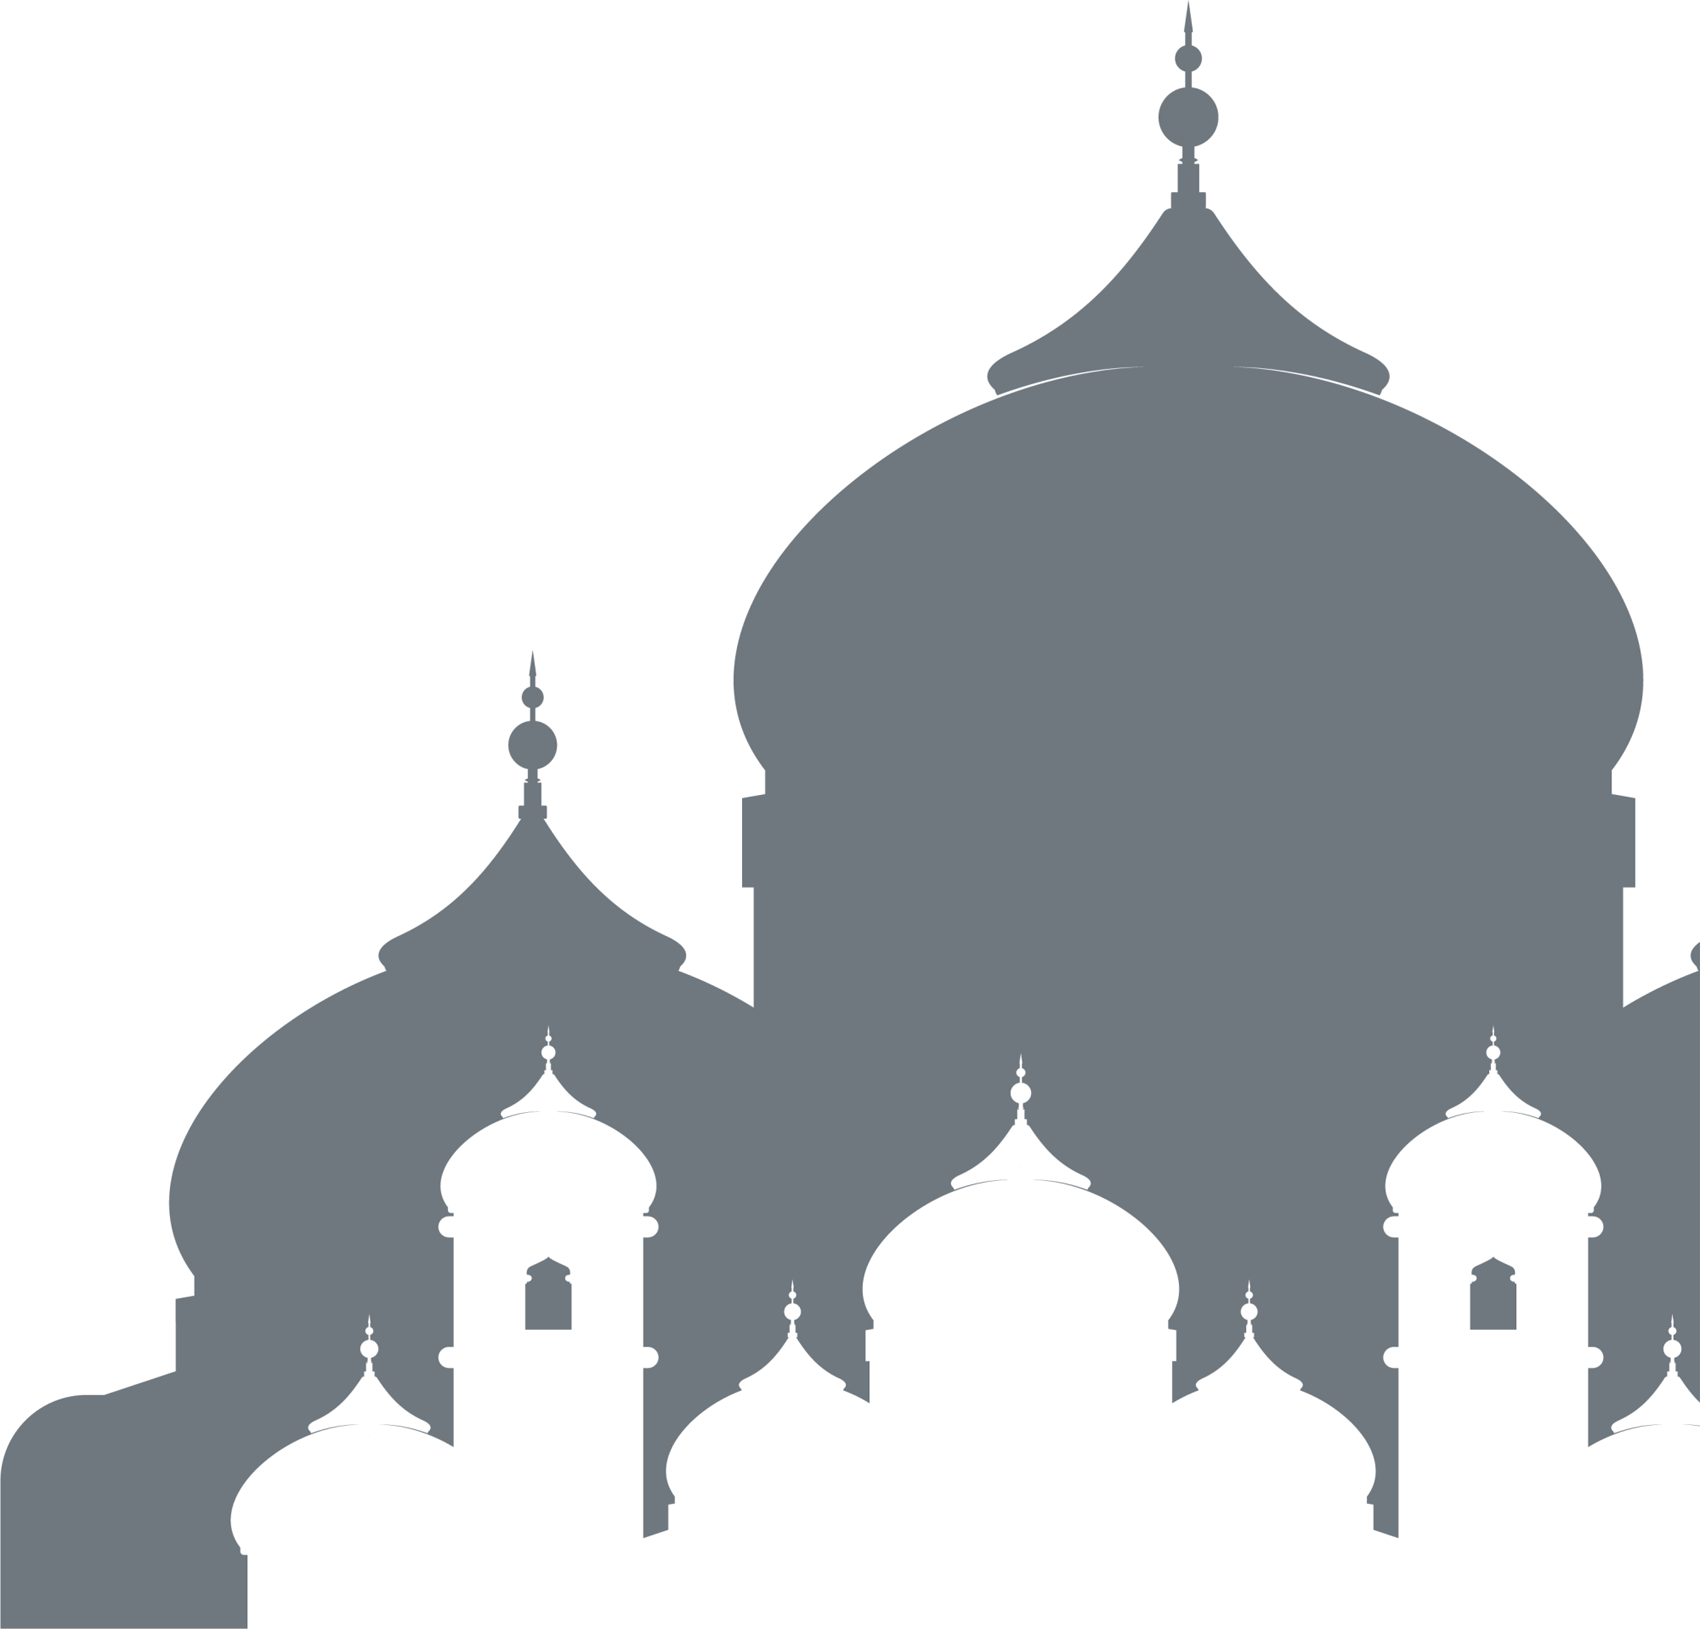 Mosque PNG image free Download 